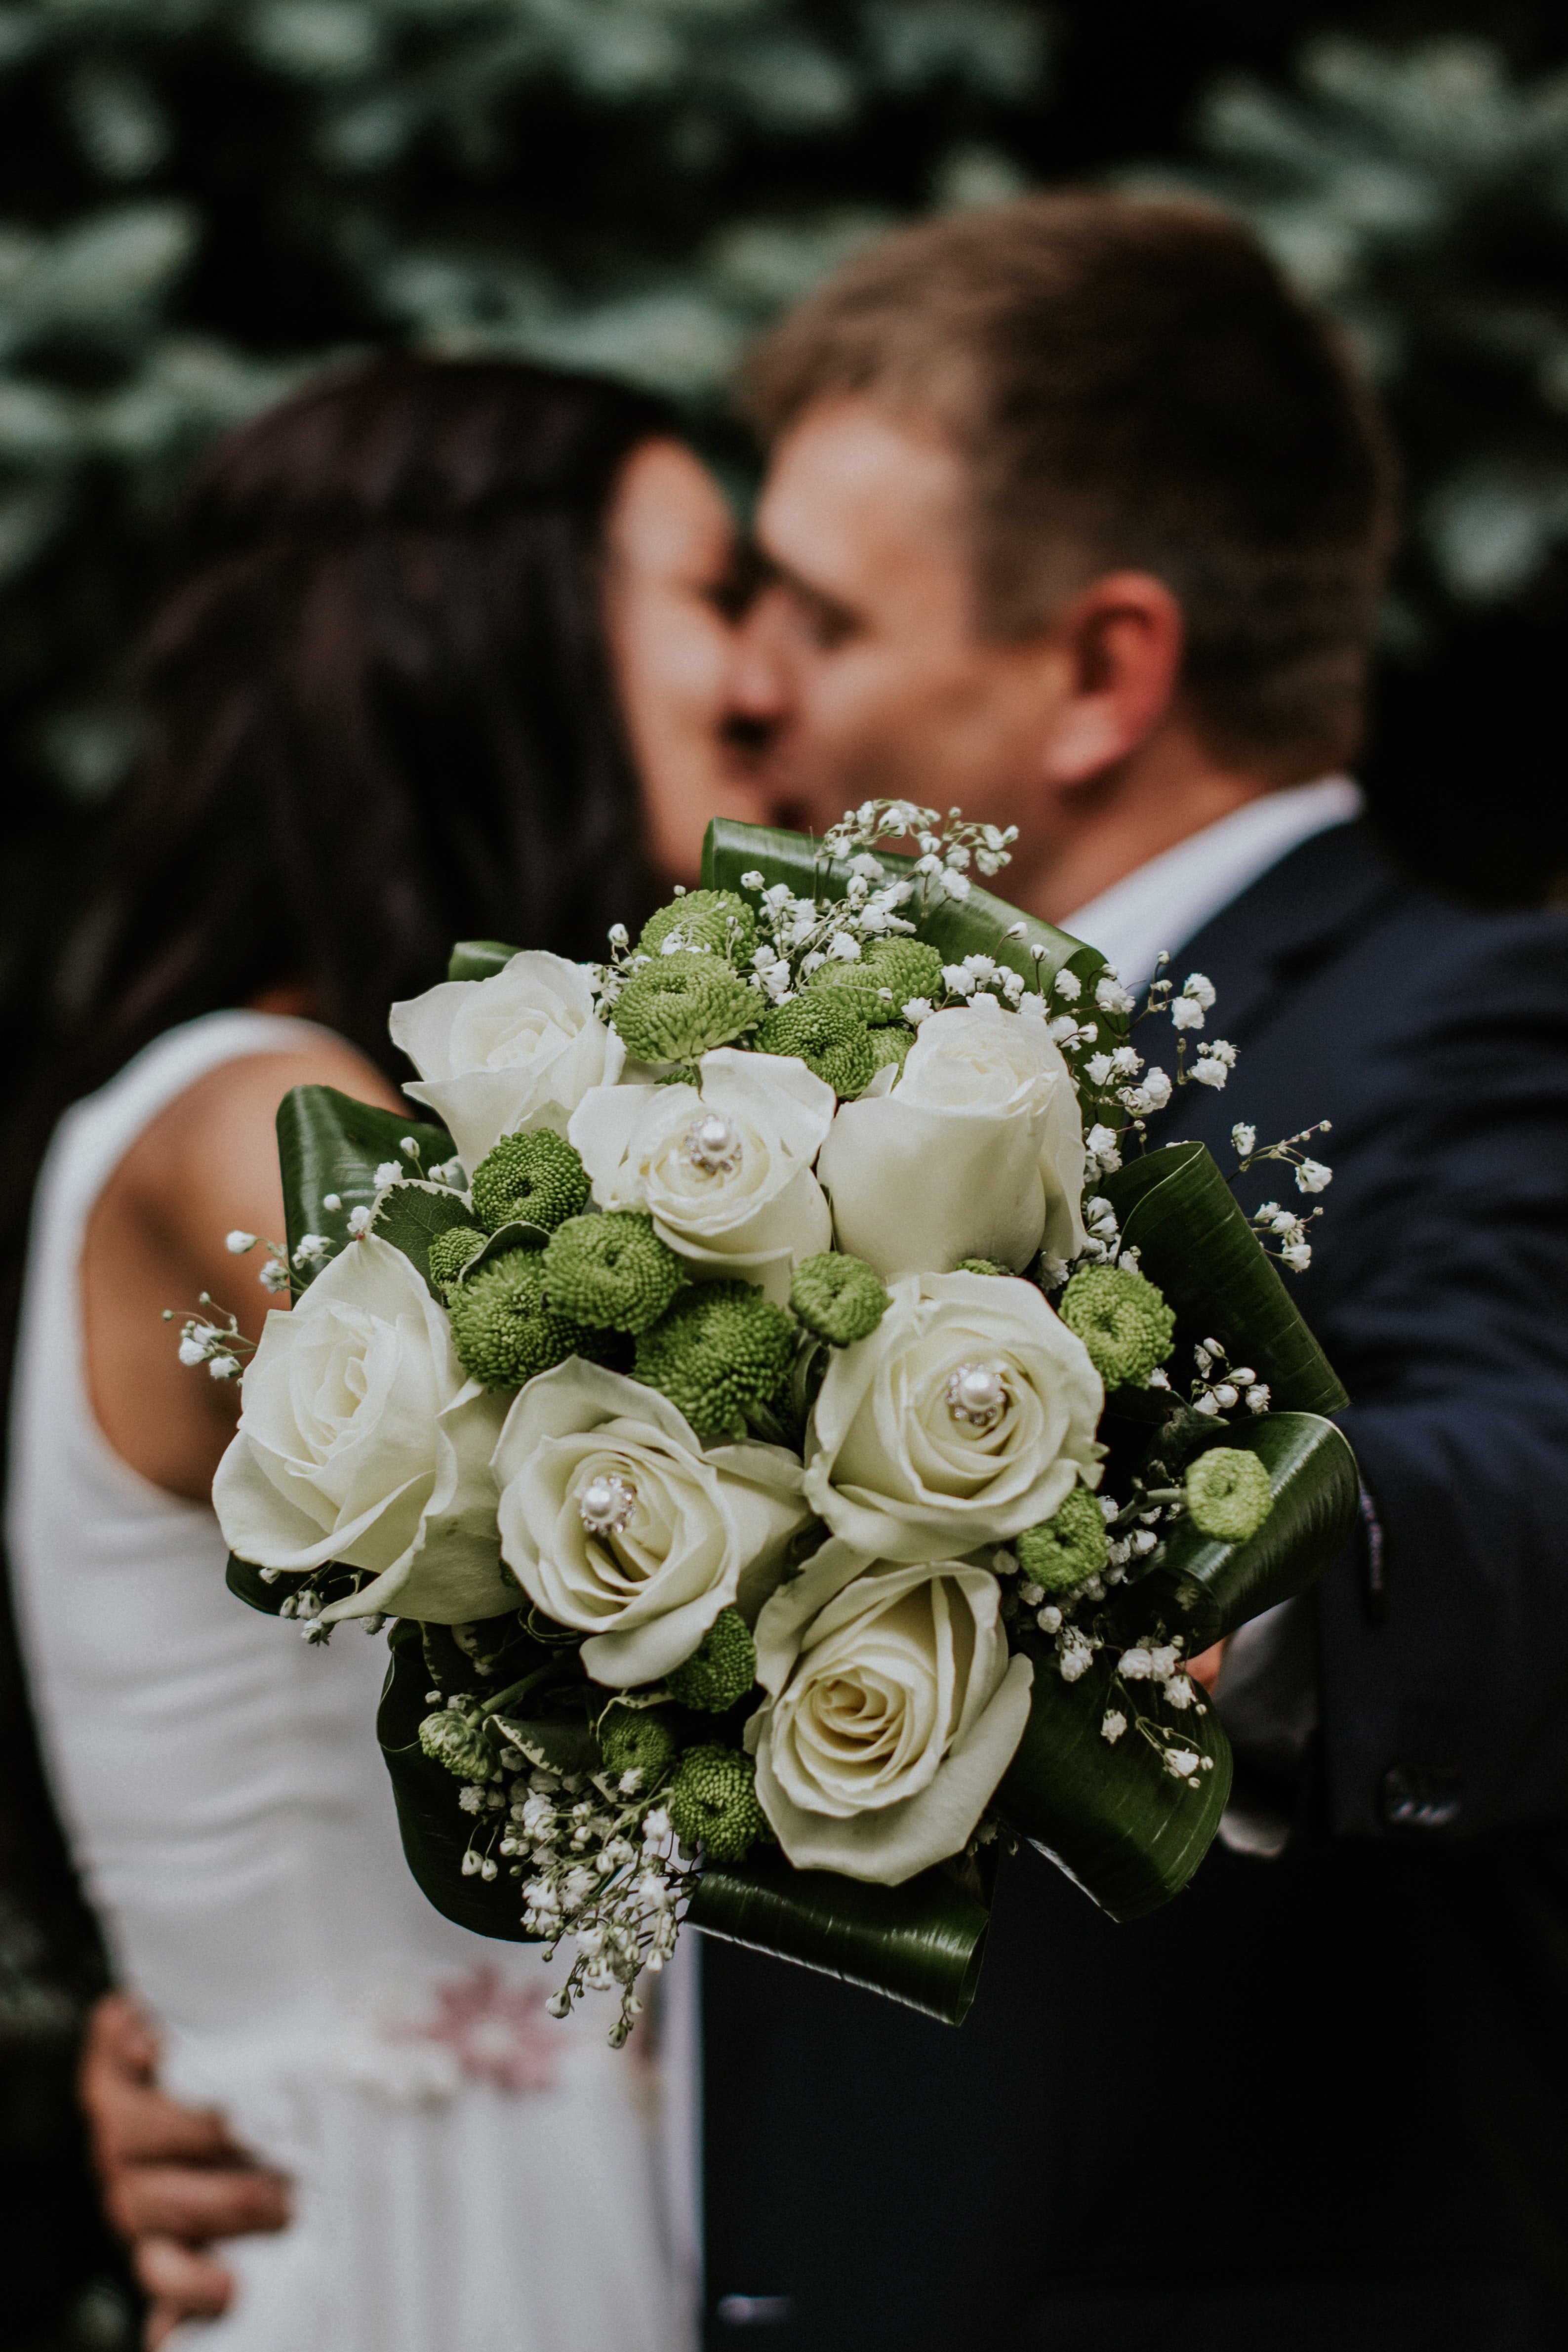 Bride and groom kissing each other. | Source: Pexels